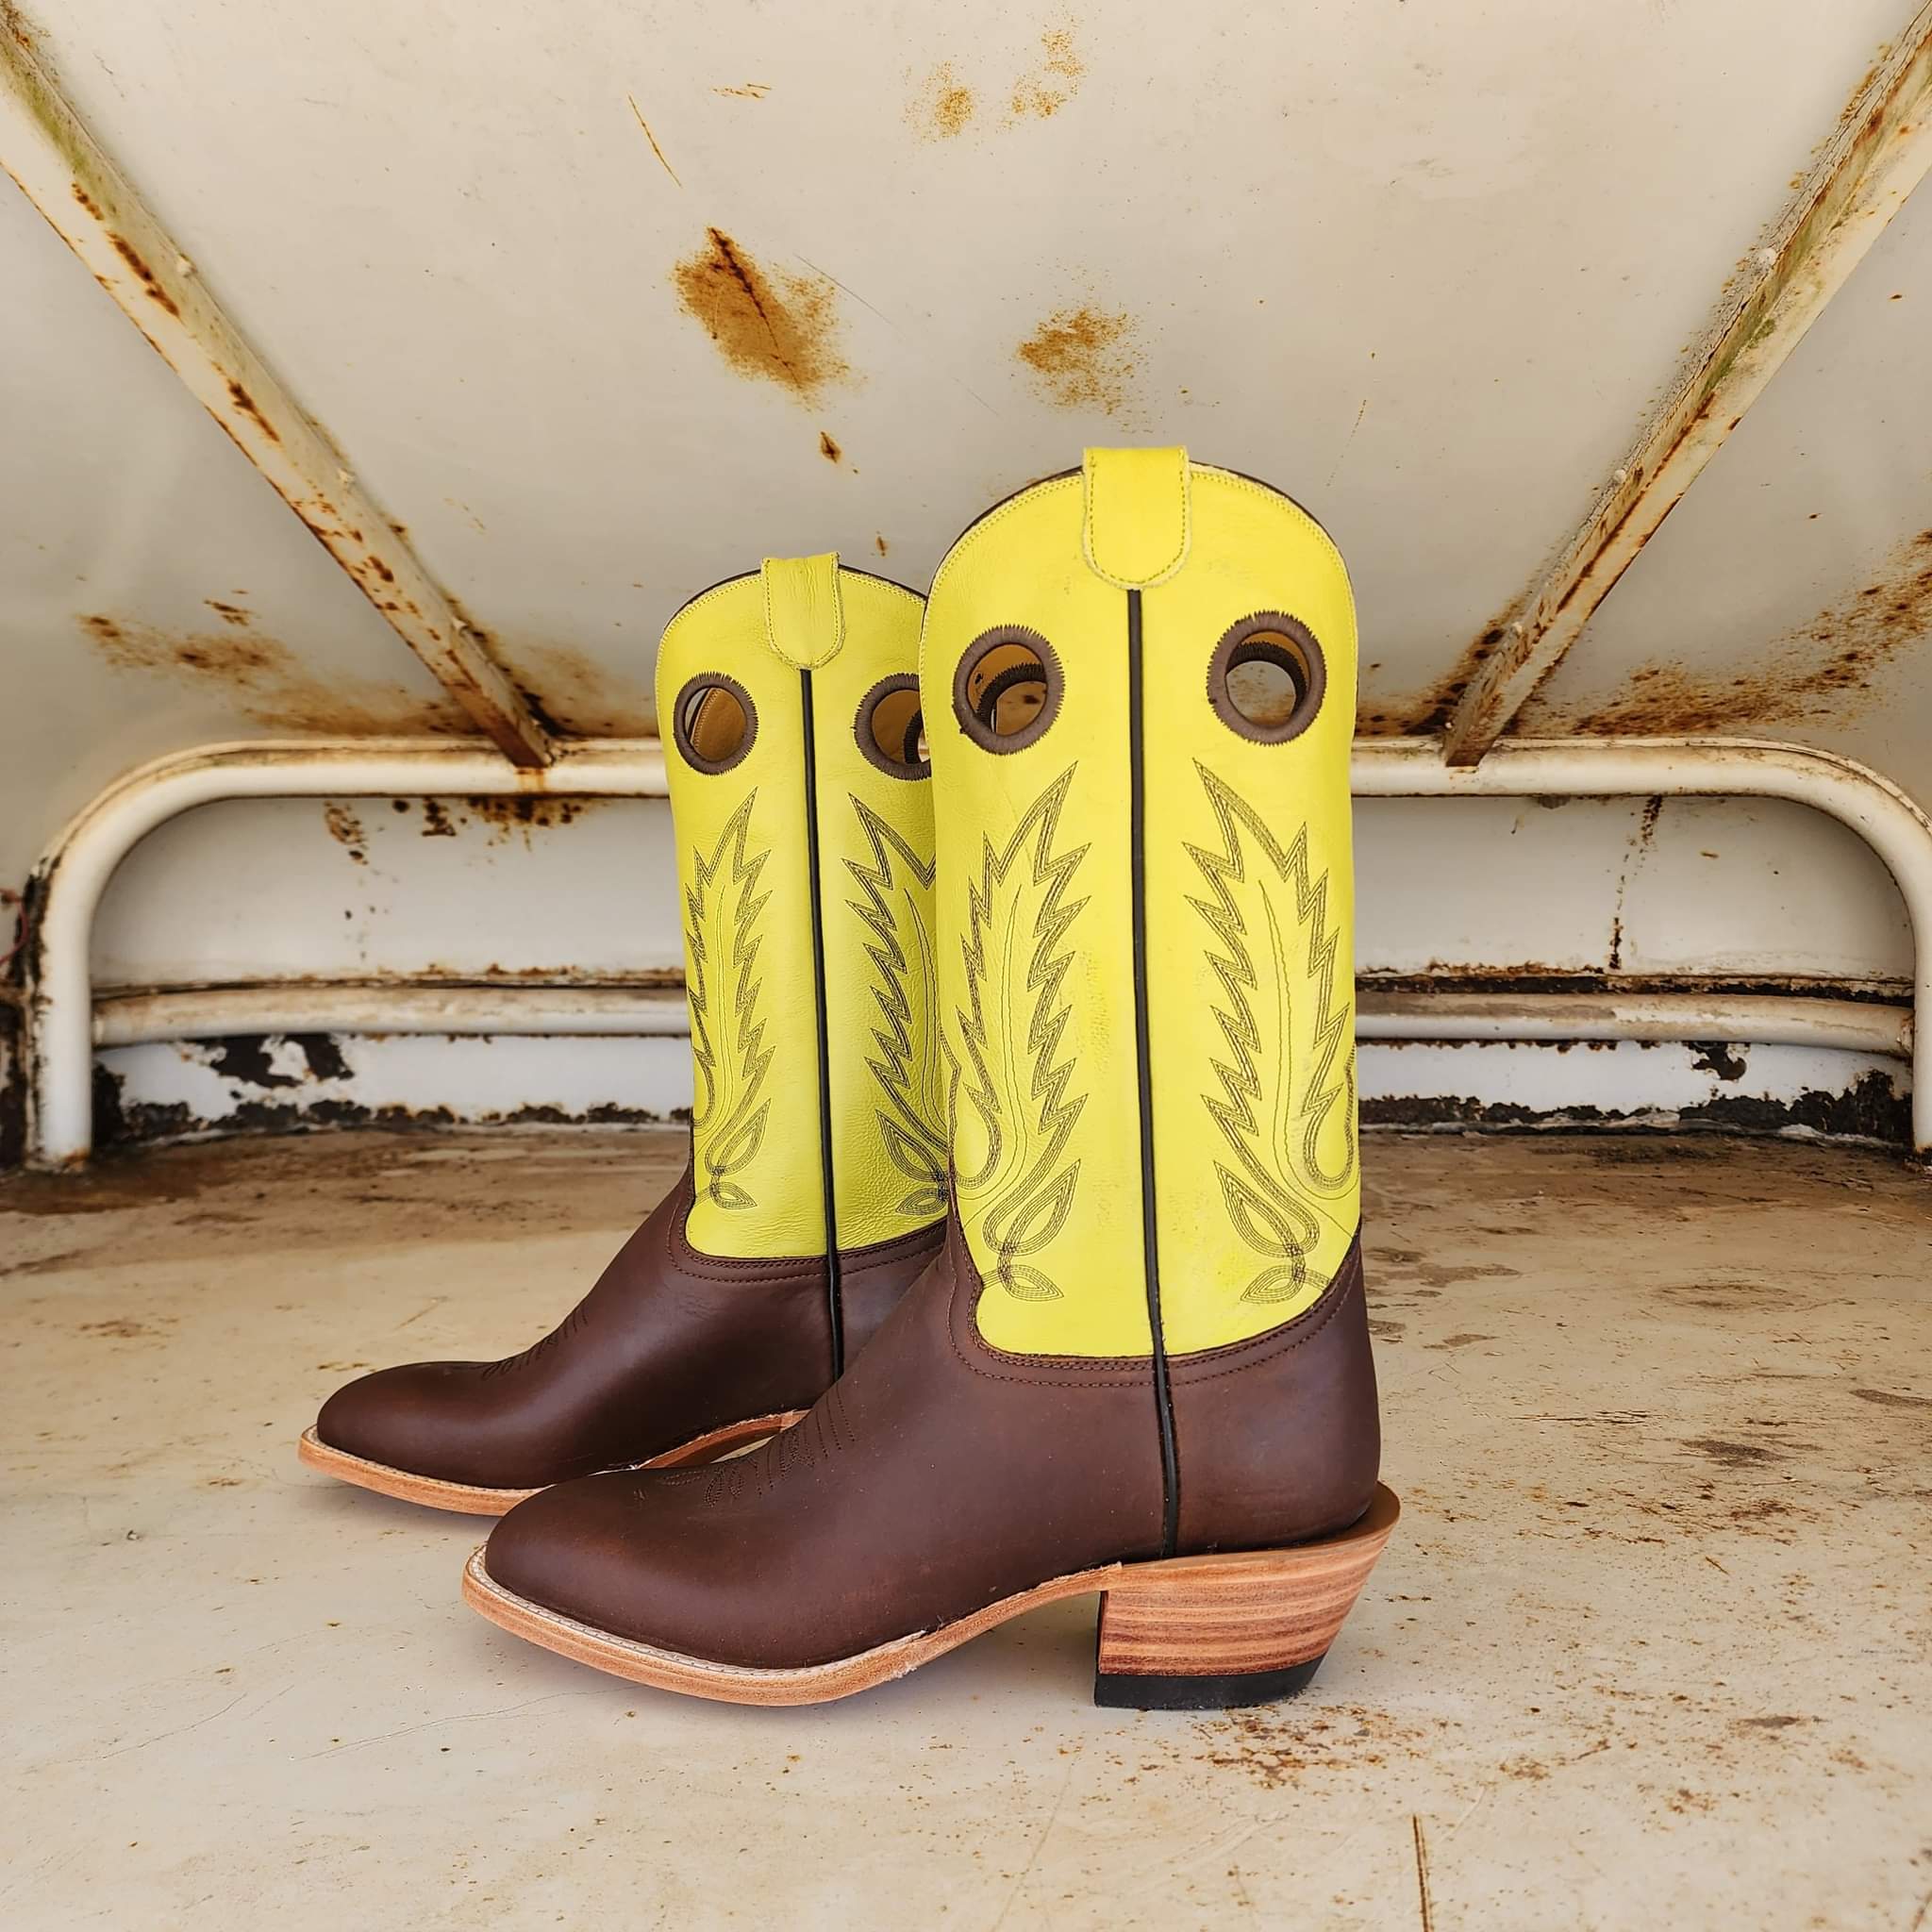 Picosa Creek Boots - Chocolate Mule W/ Yellow or Lime Green Cowhide- The Roughstock